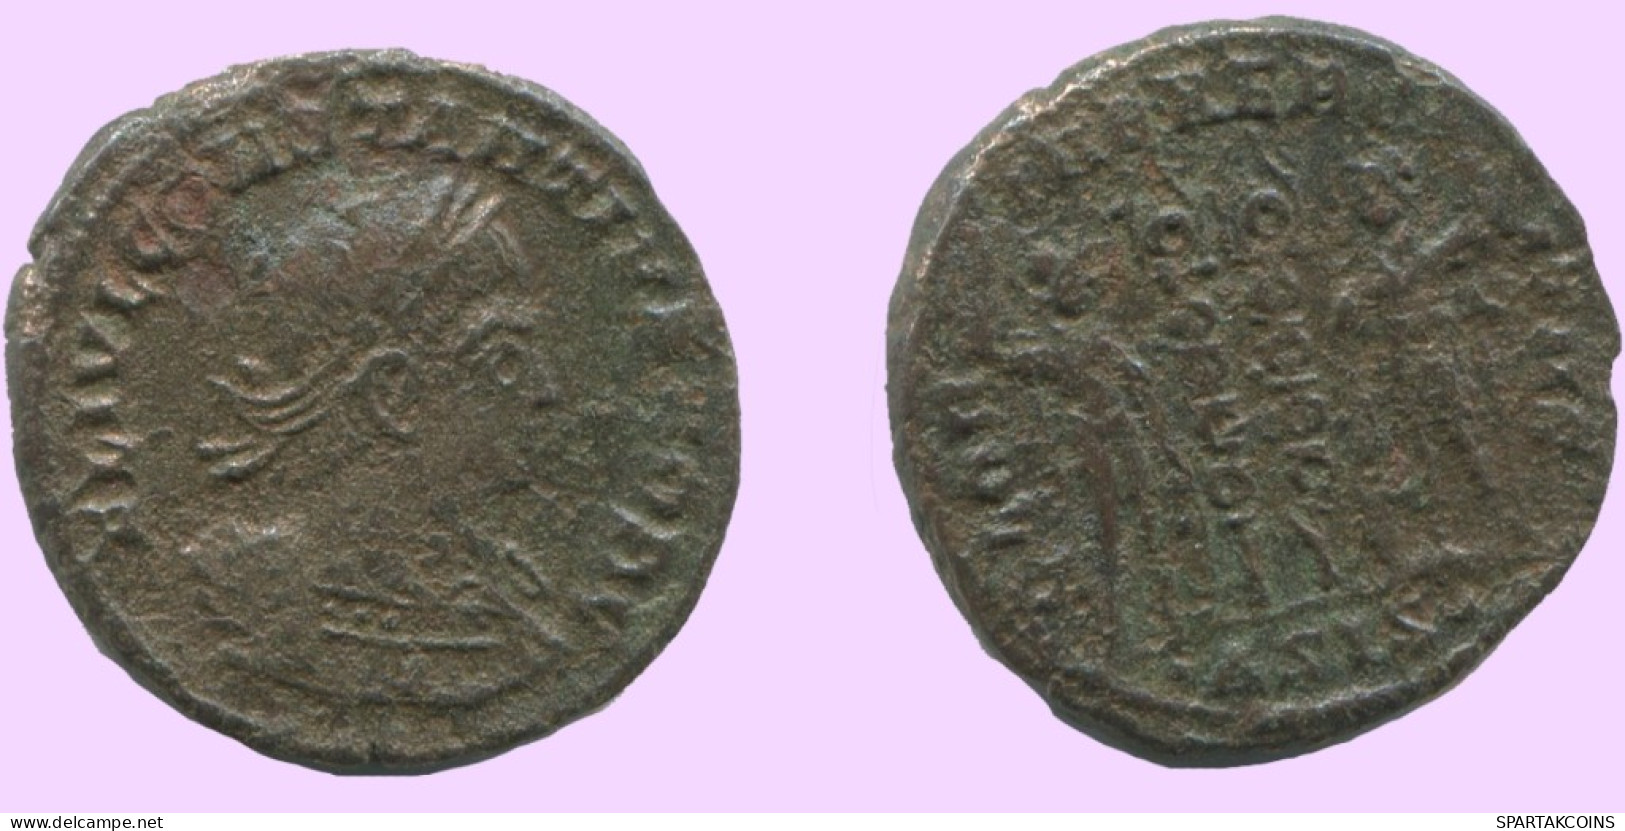 LATE ROMAN EMPIRE Follis Antique Authentique Roman Pièce 2.4g/17mm #ANT2002.7.F.A - The End Of Empire (363 AD To 476 AD)